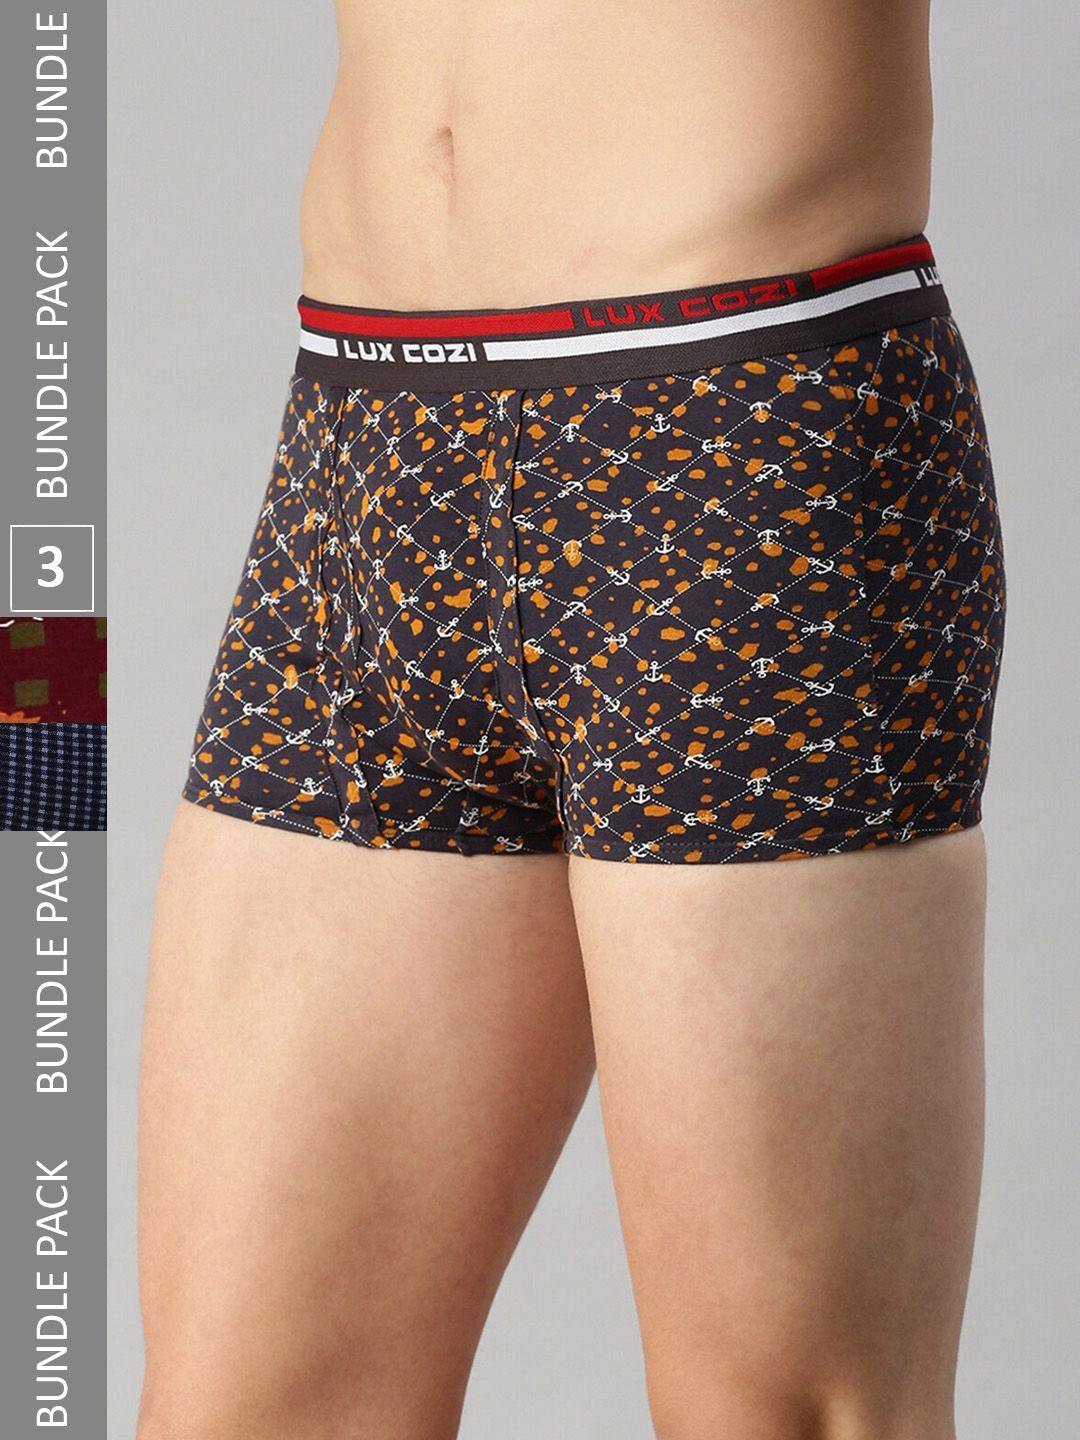 lux cozi men pack of 3 assorted pure cotton trunks- cozi_bigshot_sl_print_oe_ast5